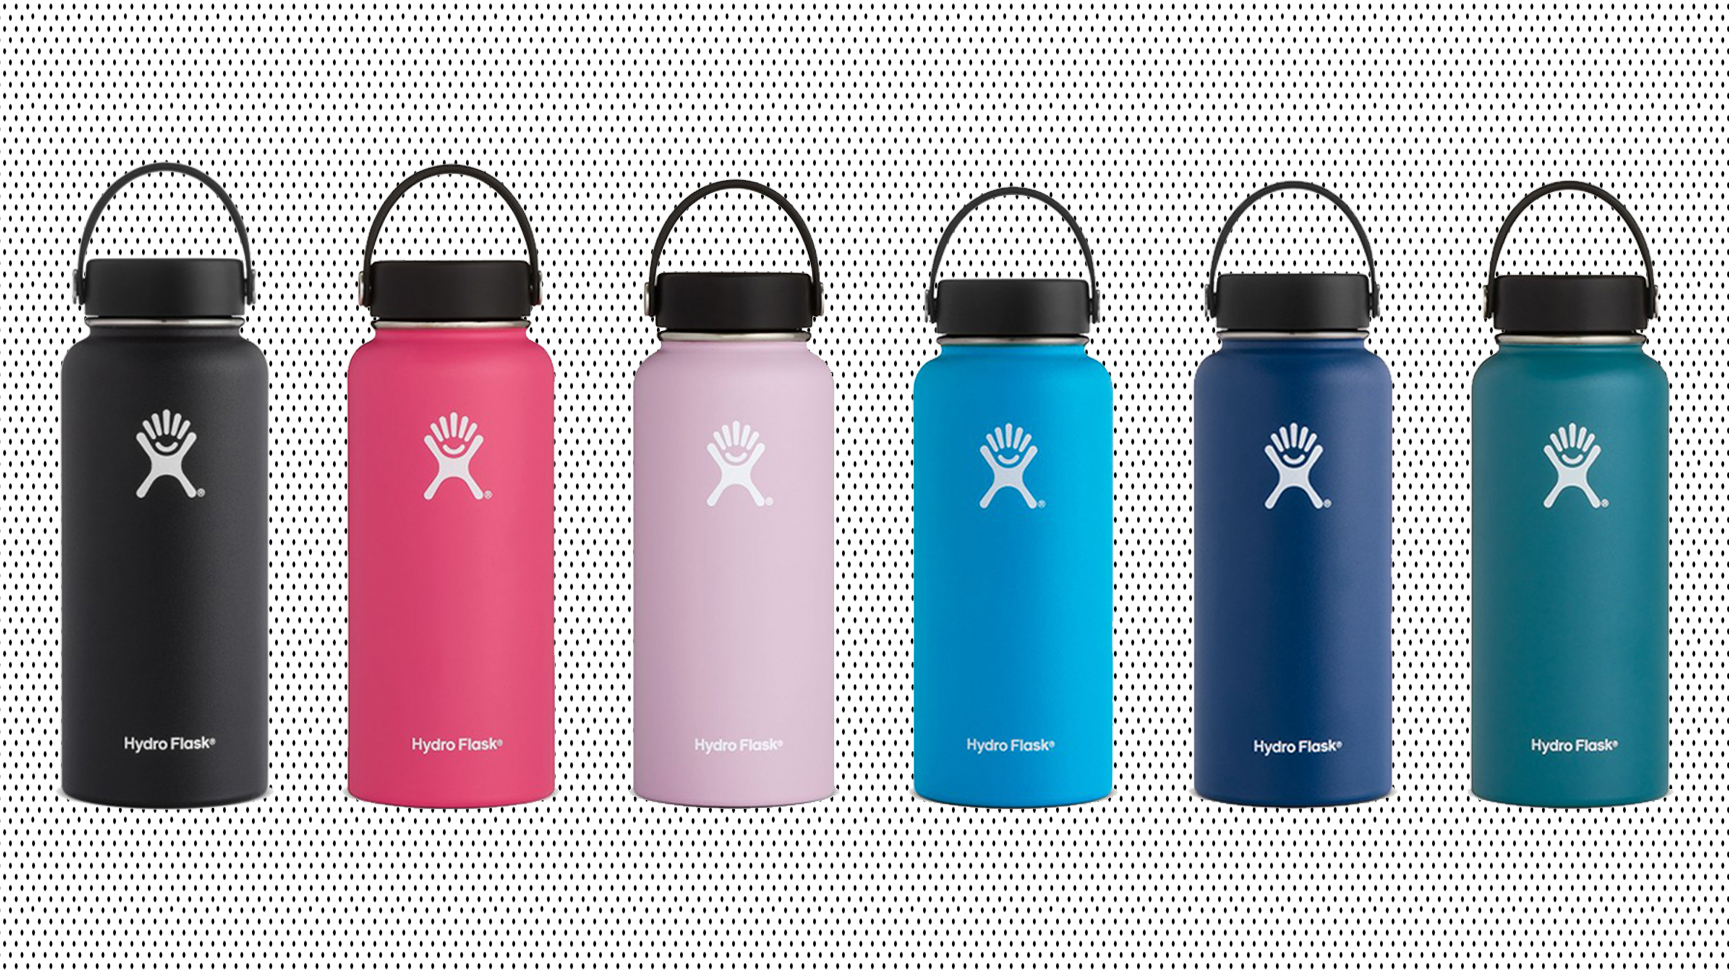 thermos flask boots